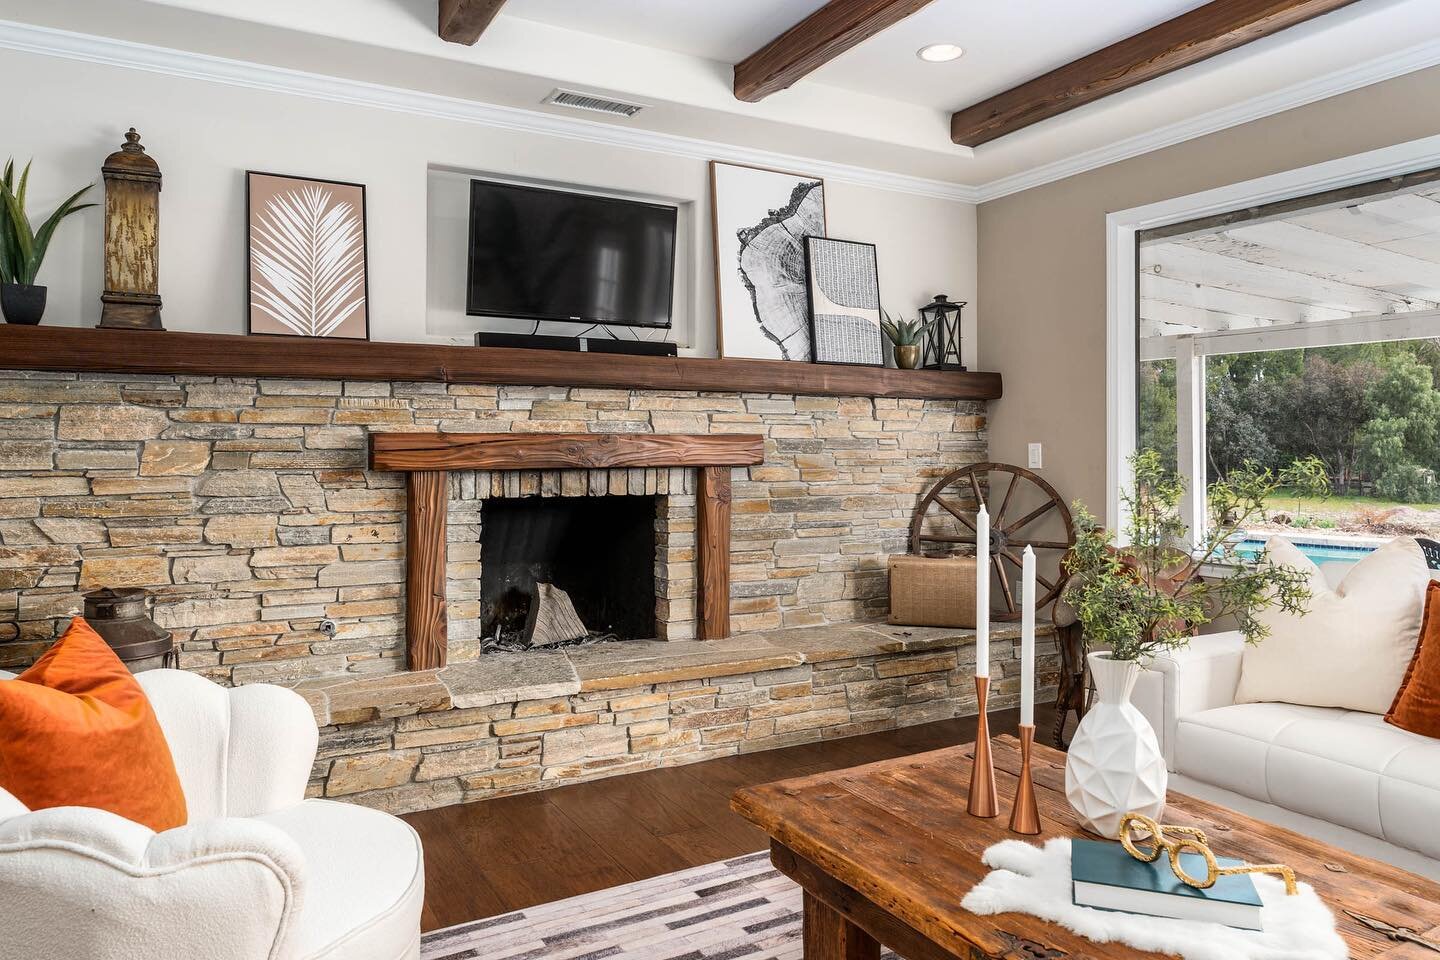 What&rsquo;s your thoughts on this fireplace? 🔥

Looking for high quality photos/video for your next listing? DM @inlandrealestatephotography for details or go to www.inlandrealestatephotography.com
.
#riversiderealestatephotography #luxuryphotograp